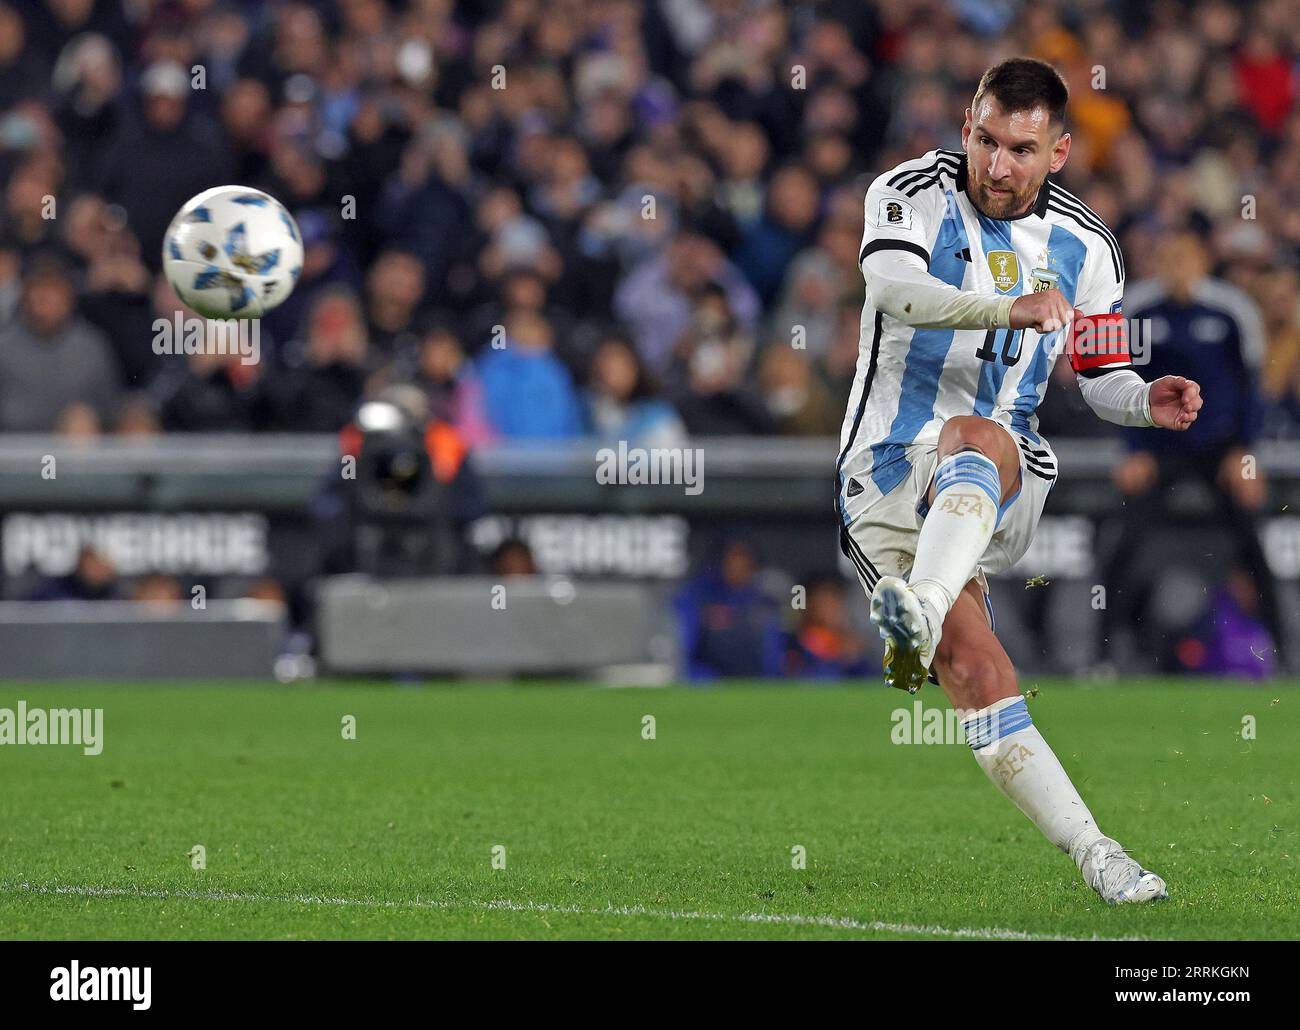 Buenos Aires, Argentina. 7th Sep 2023. Argentina's forward Lionel Messi takes a free-kick to score a goal against Ecuador during the South American qualification football match for the FIFA World Cup 2026 at the Monumental stadium in Buenos Aires on September 7, 2023. Credit: Alejandro Pagni/Alamy Live News Stock Photo